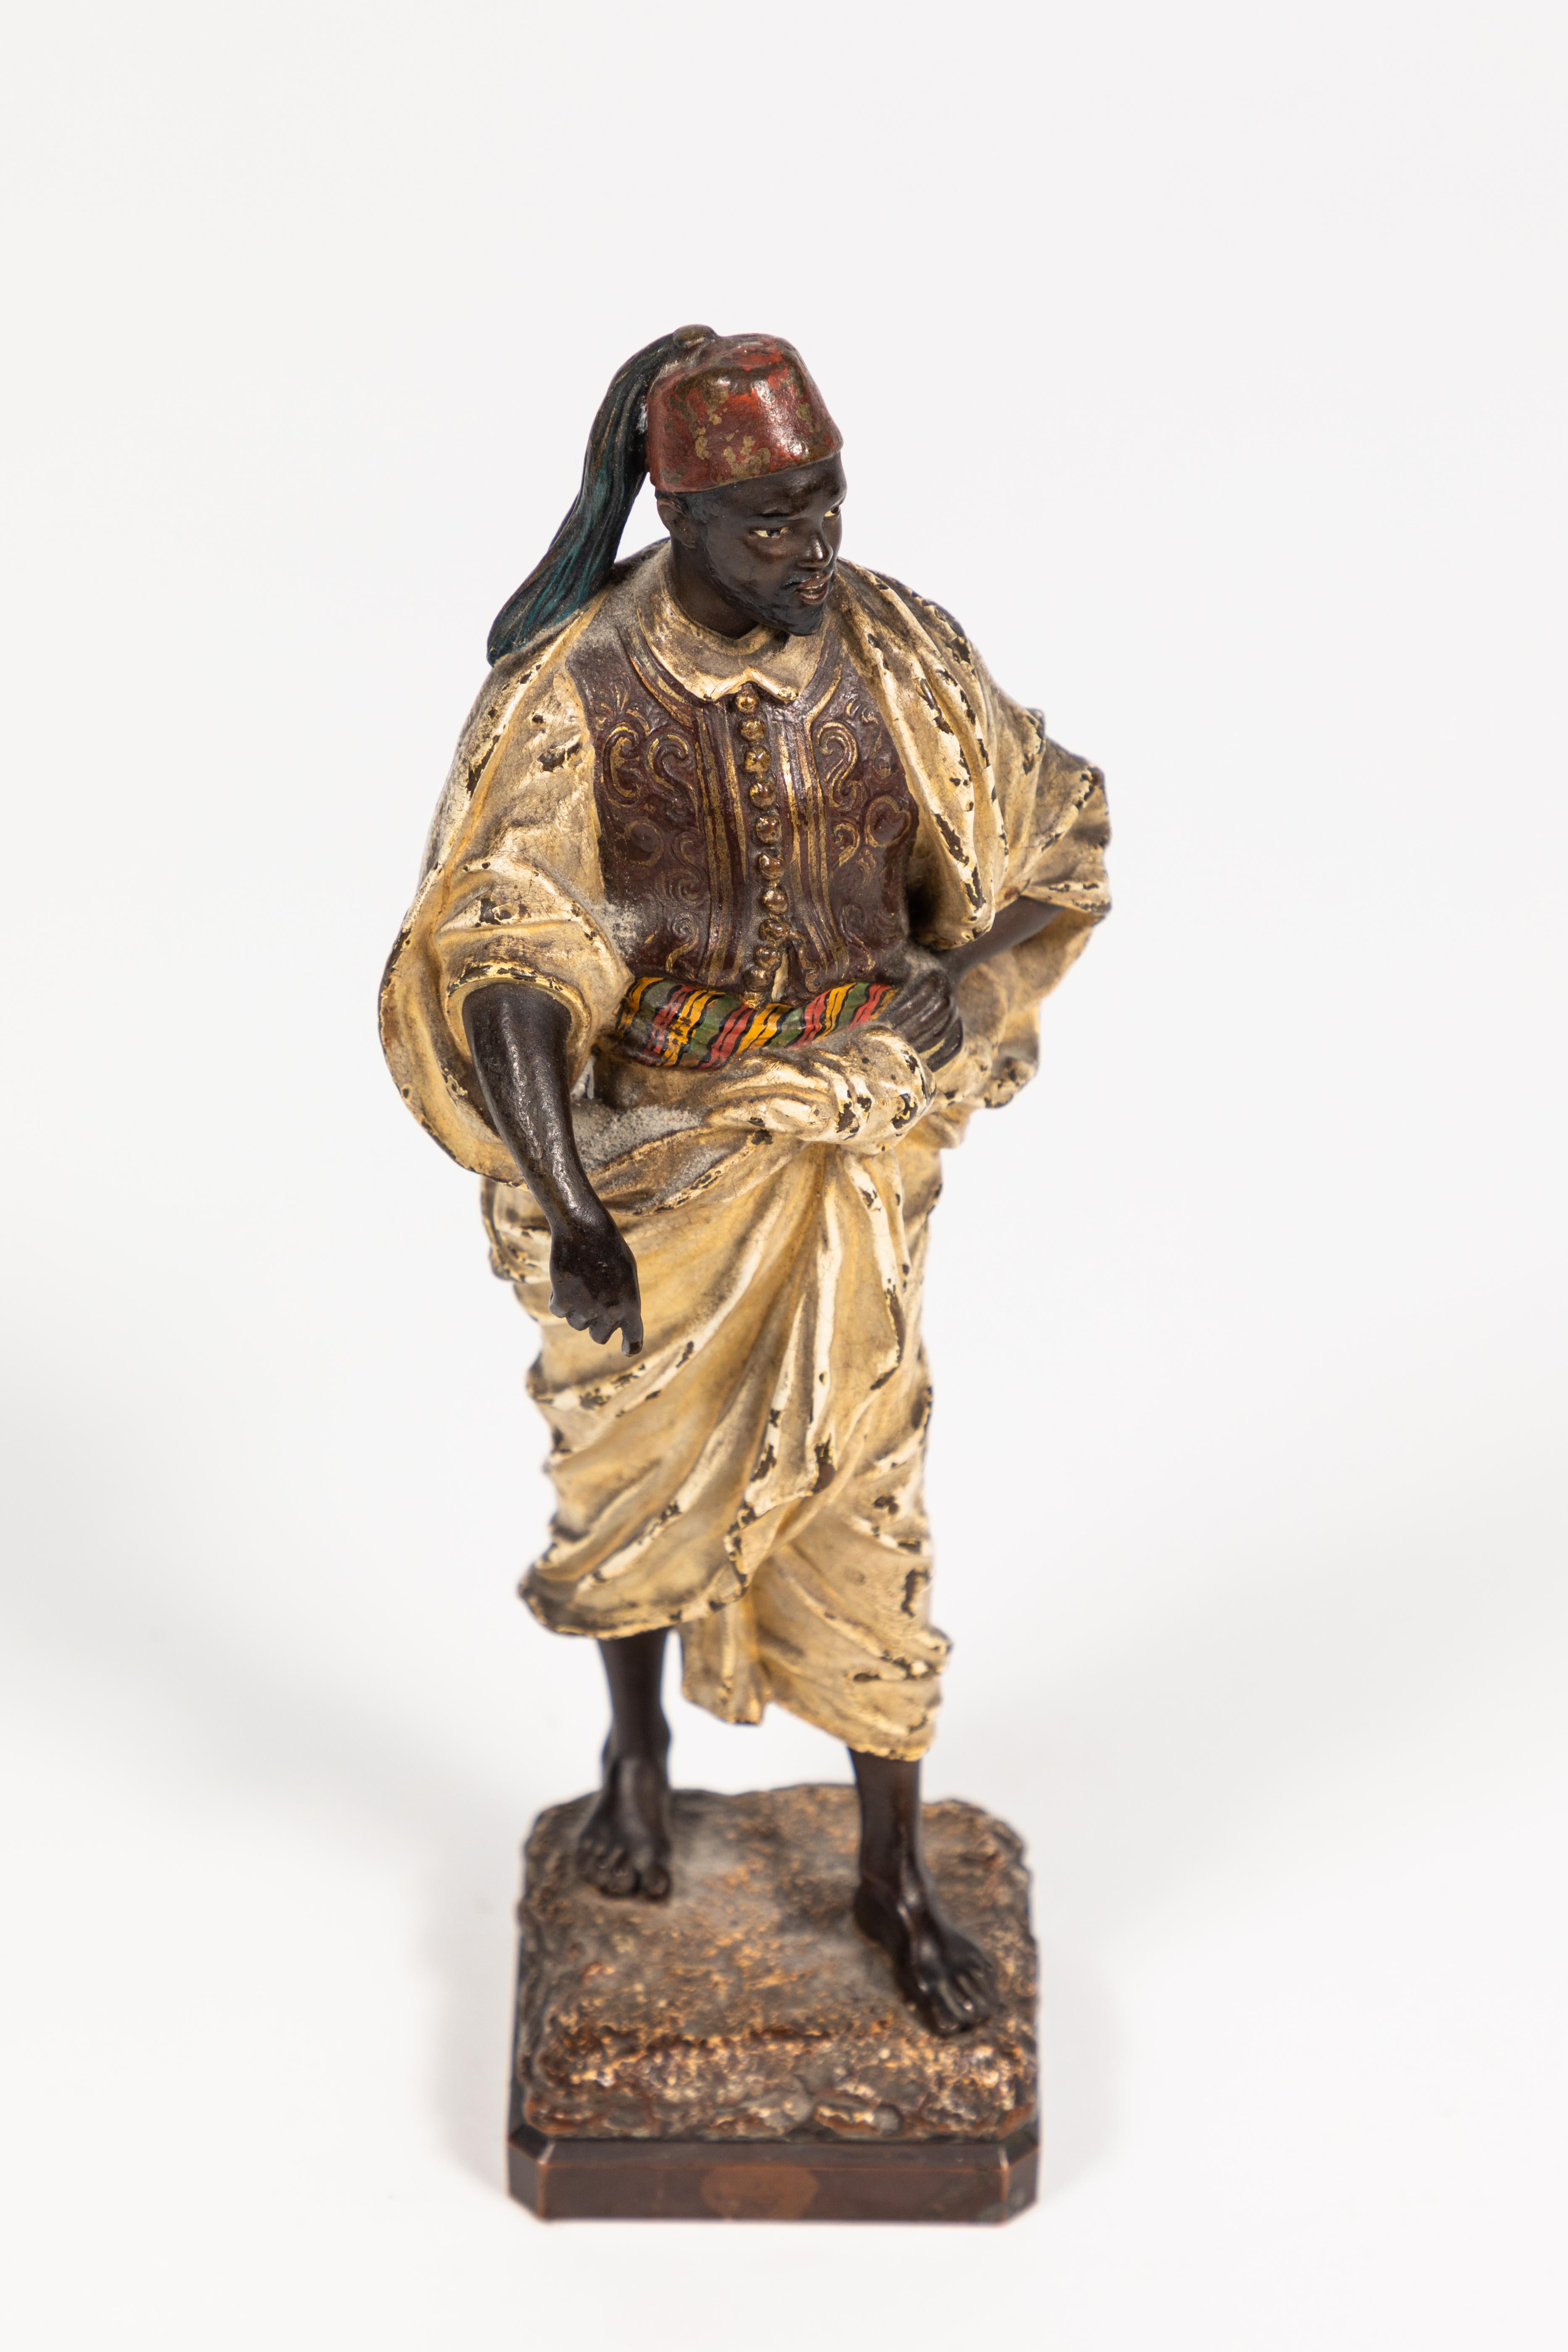 Hand painted figure of an Arab man. Early 1900s. European. Not sure of origin. Signed by artist: 